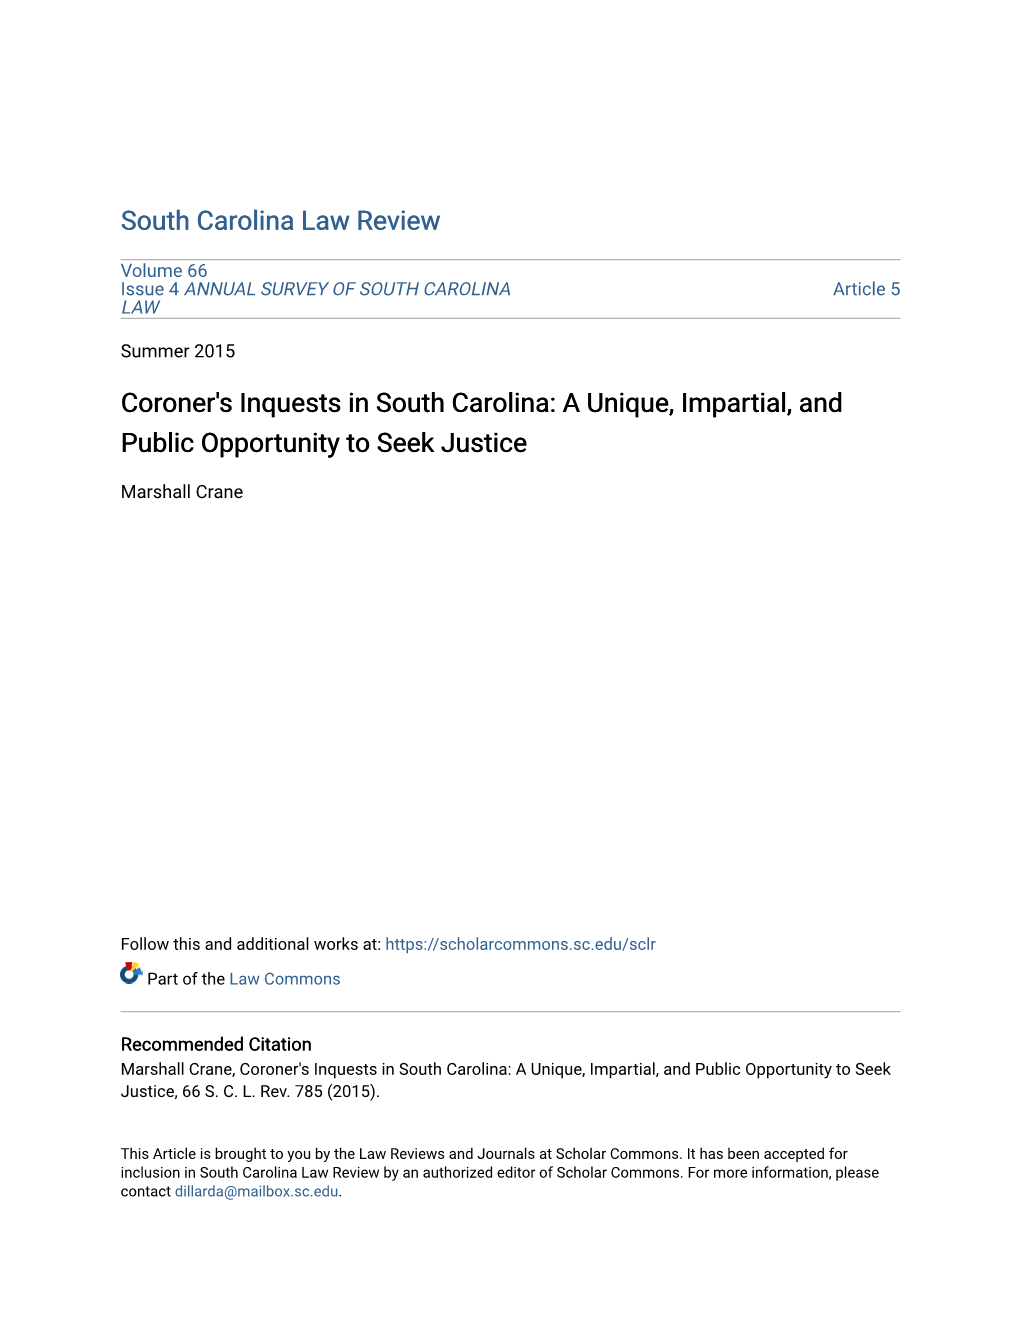 Coroner's Inquests in South Carolina: a Unique, Impartial, and Public Opportunity to Seek Justice